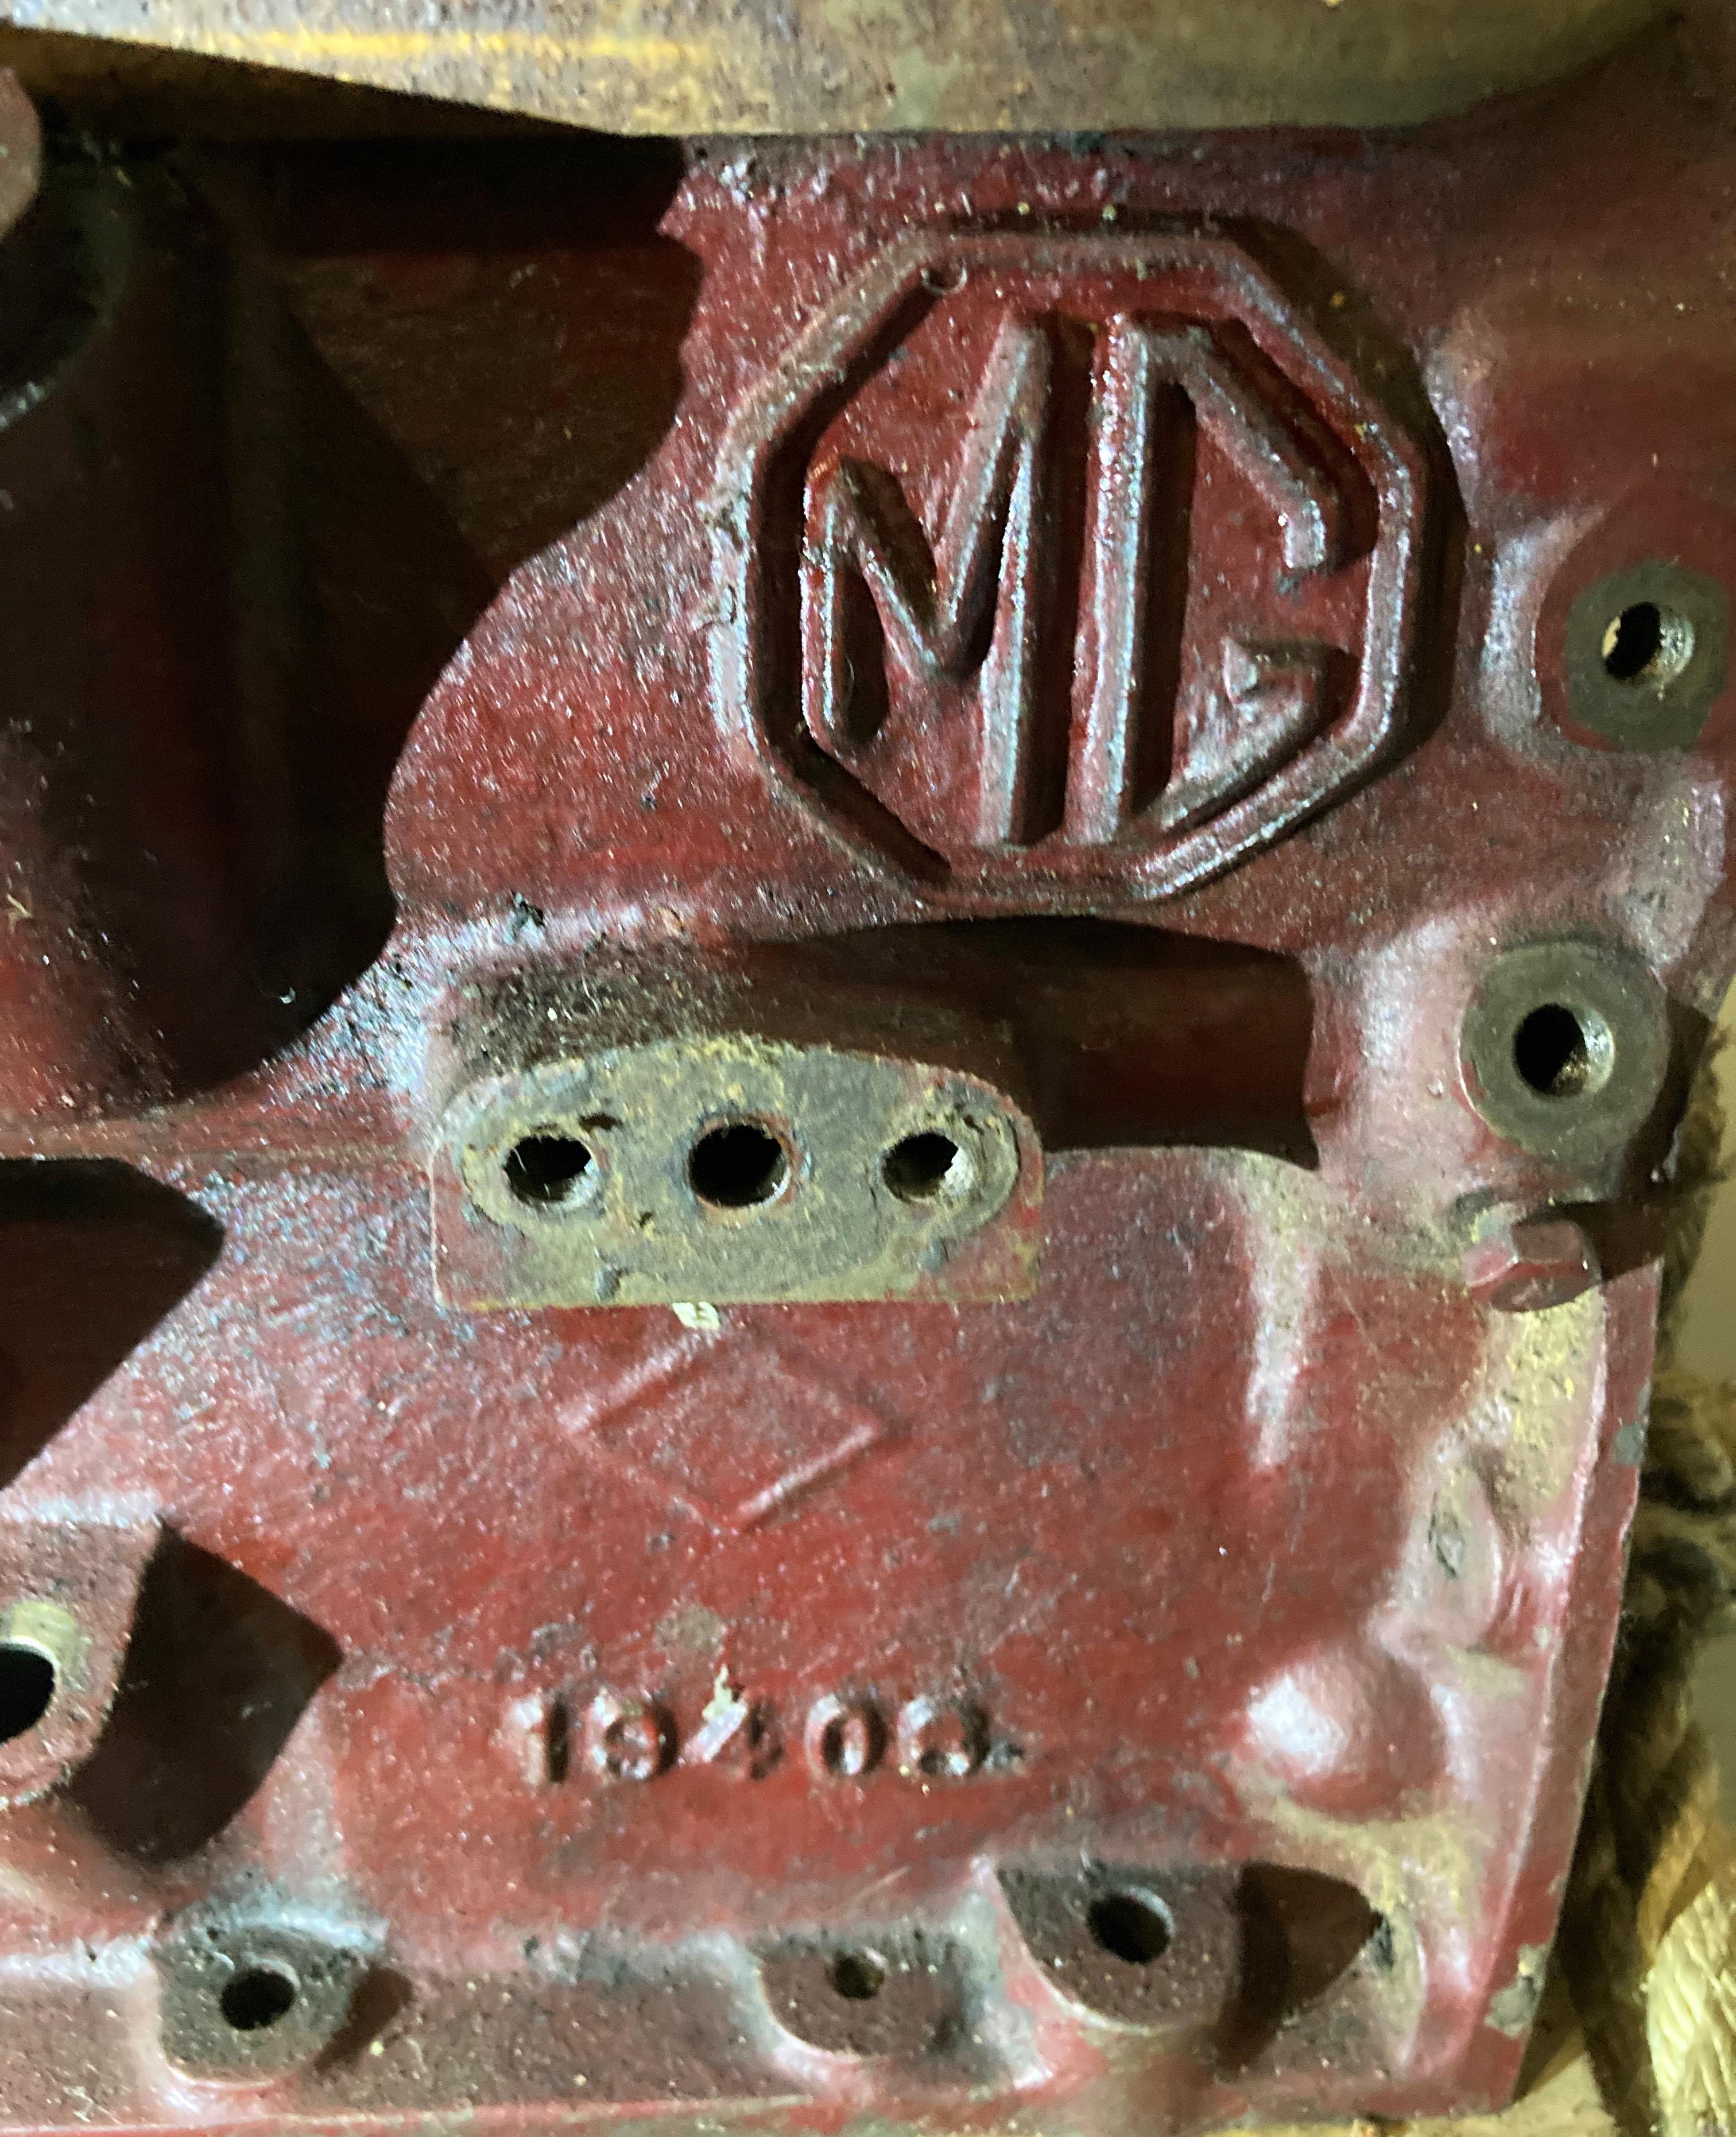 Vintage MG engine with four pistons and spare parts (saleroom location: MA1) - Image 5 of 8